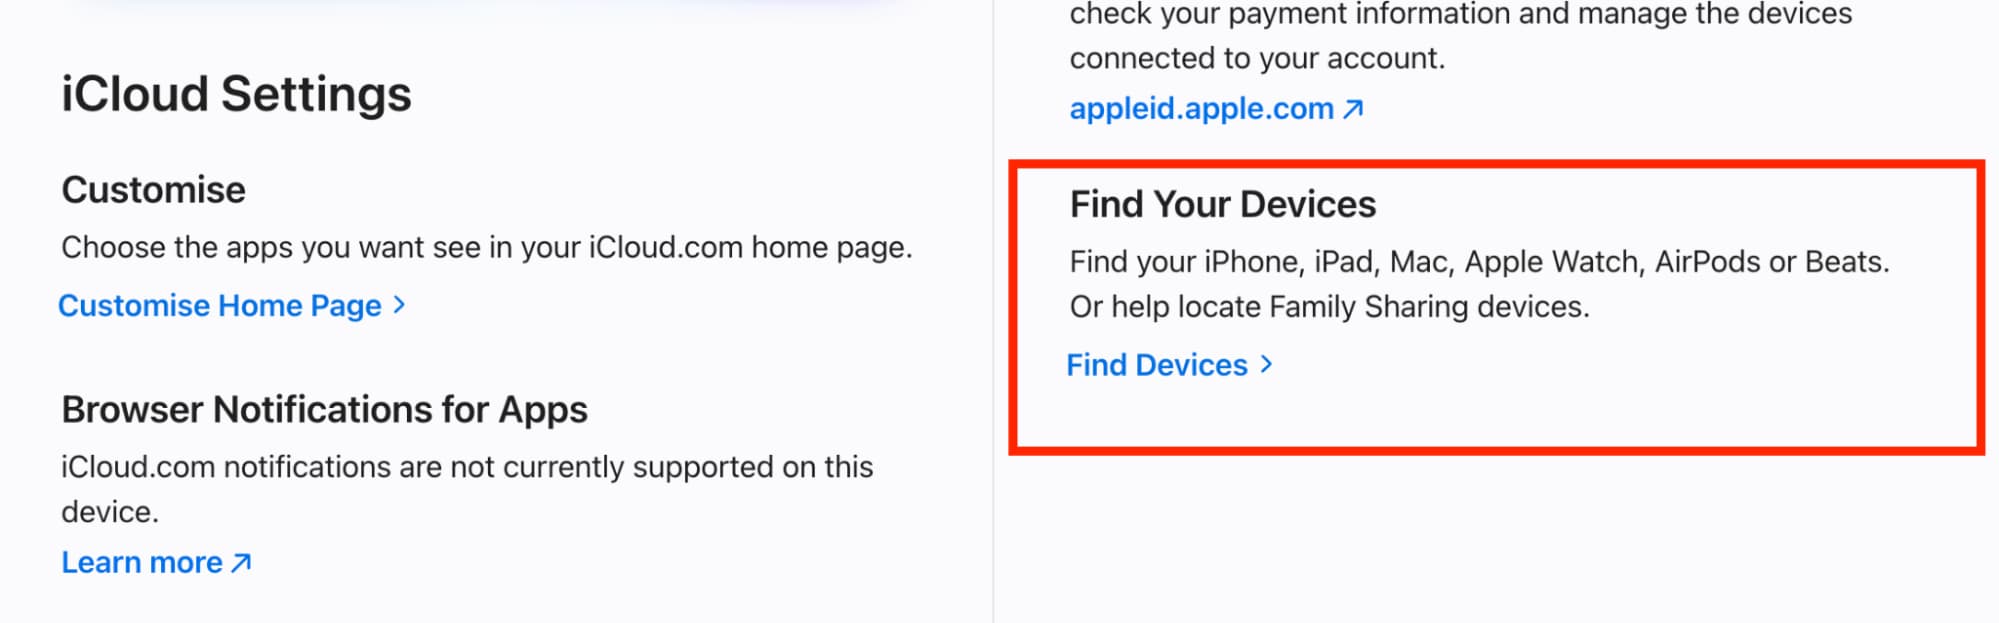 iCloud Find Your Devices